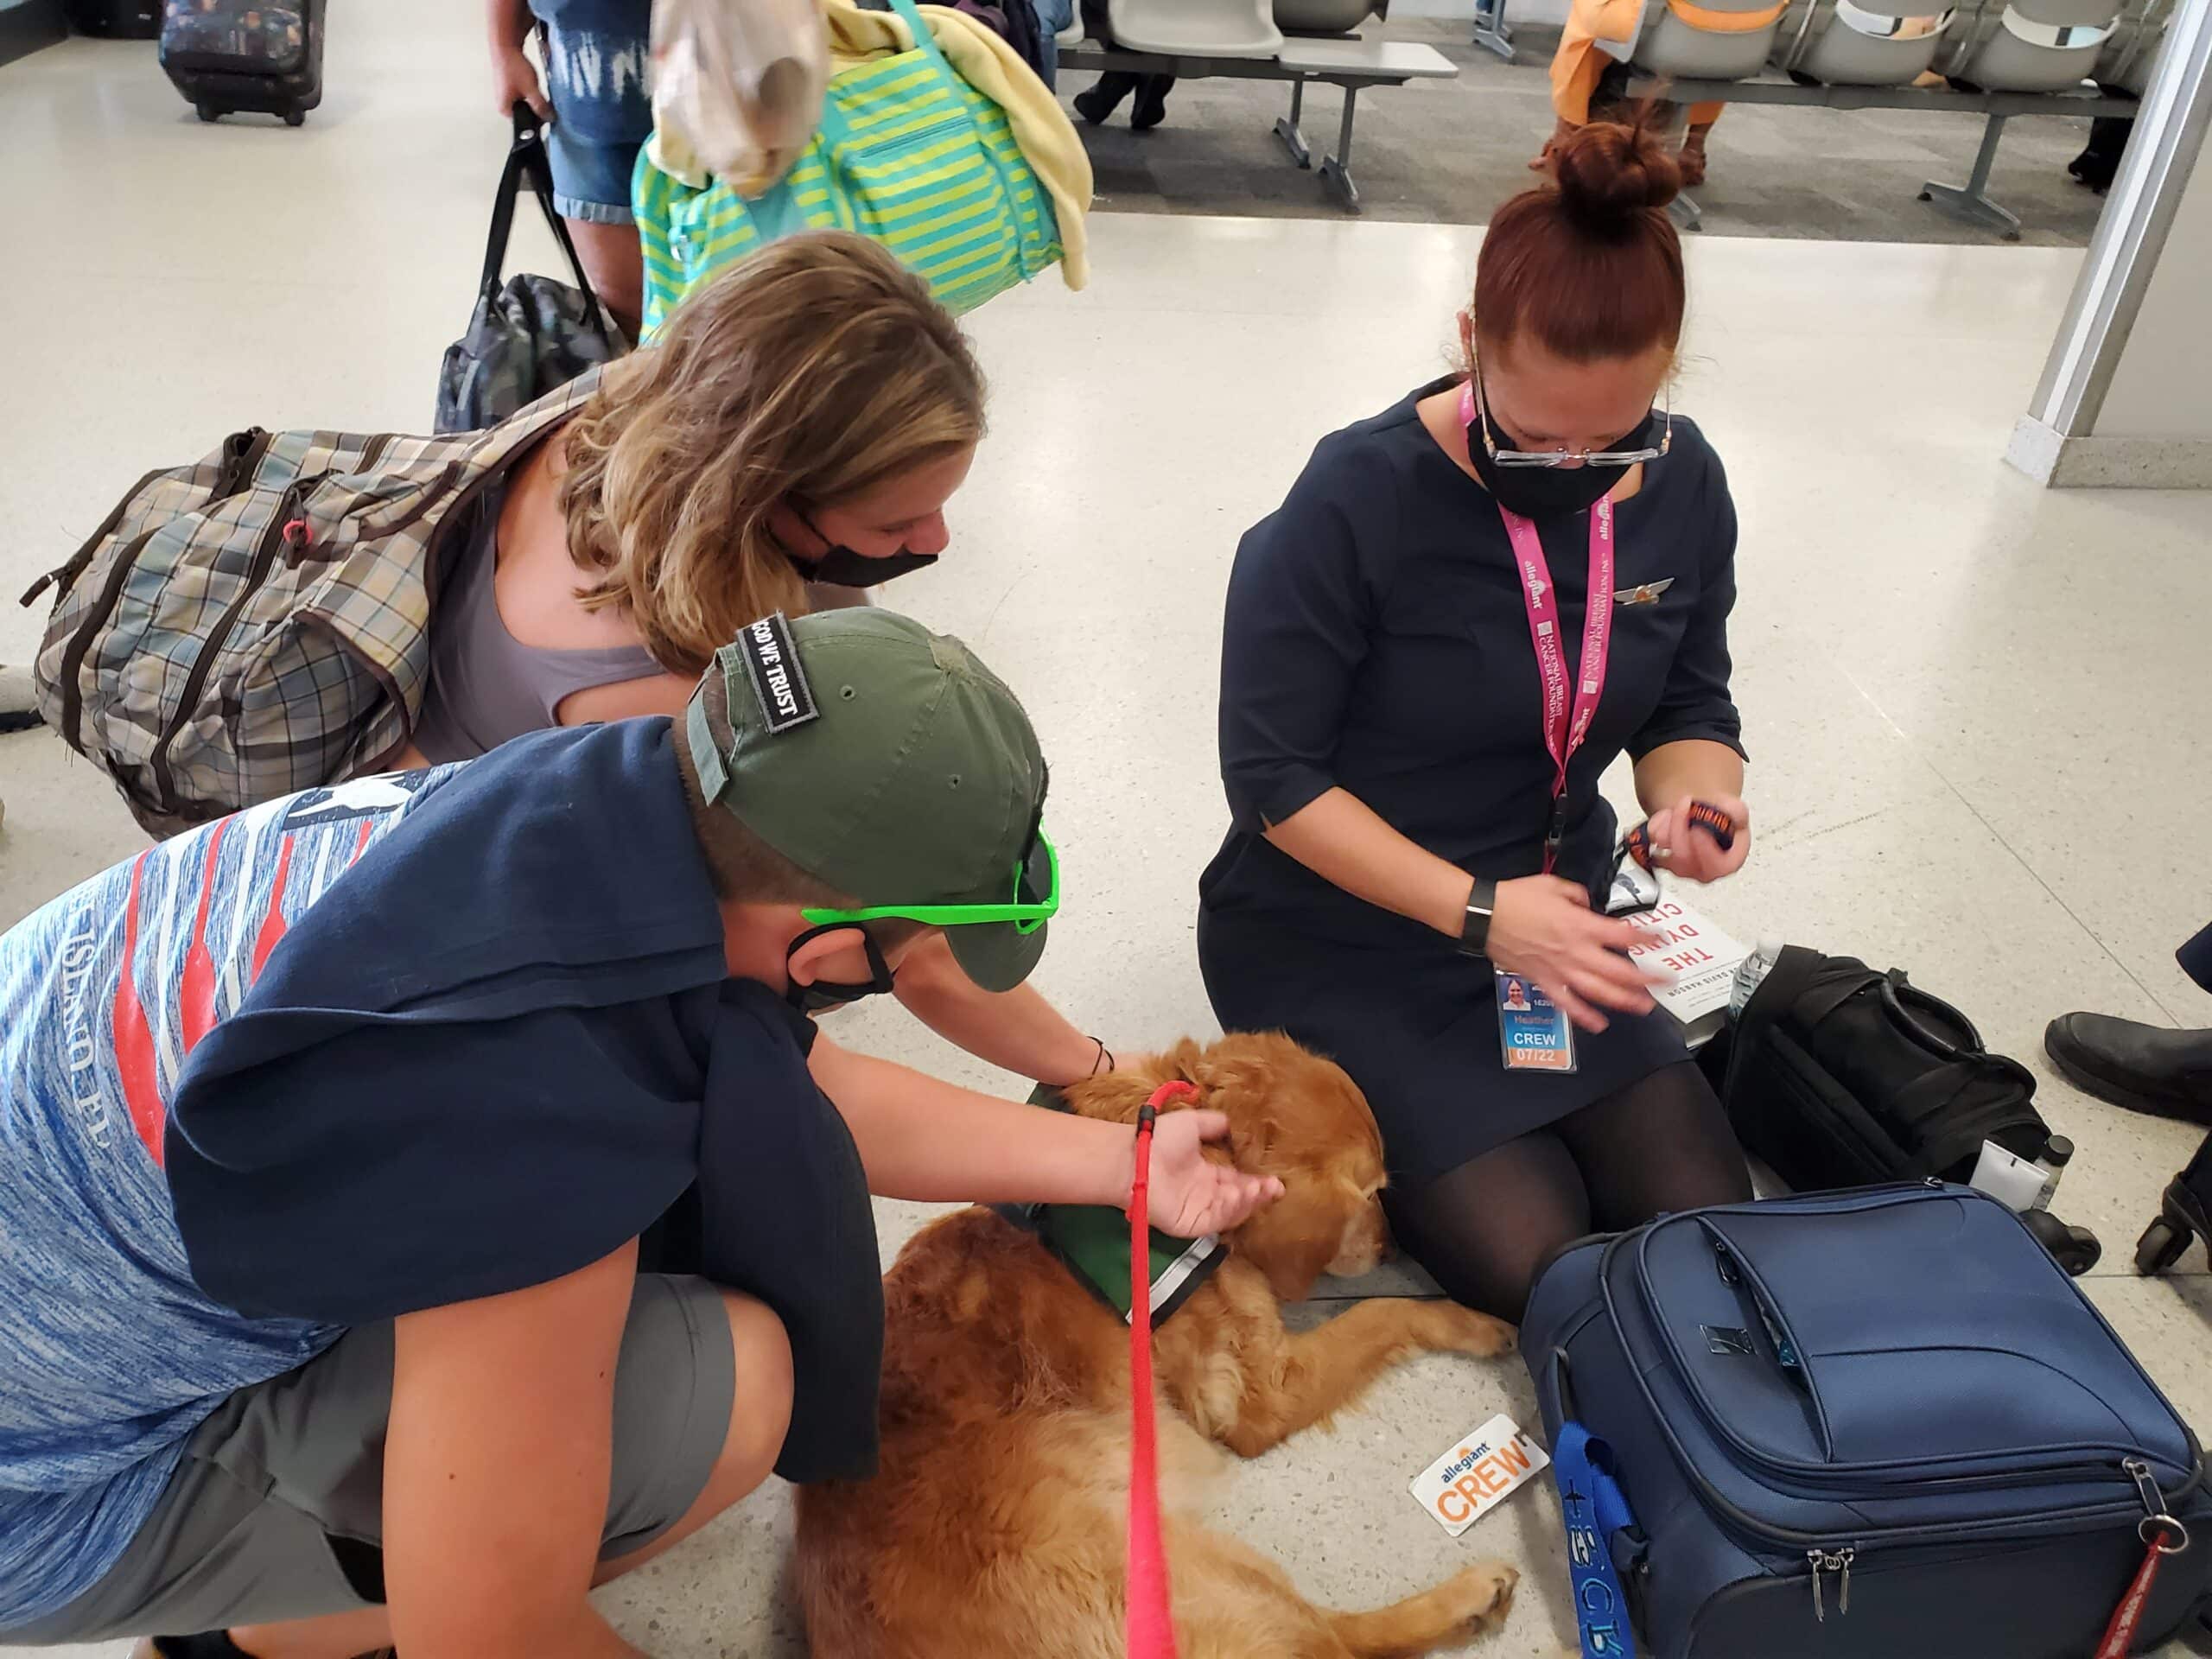 A therapy dog receives pets during a visit at the airport.